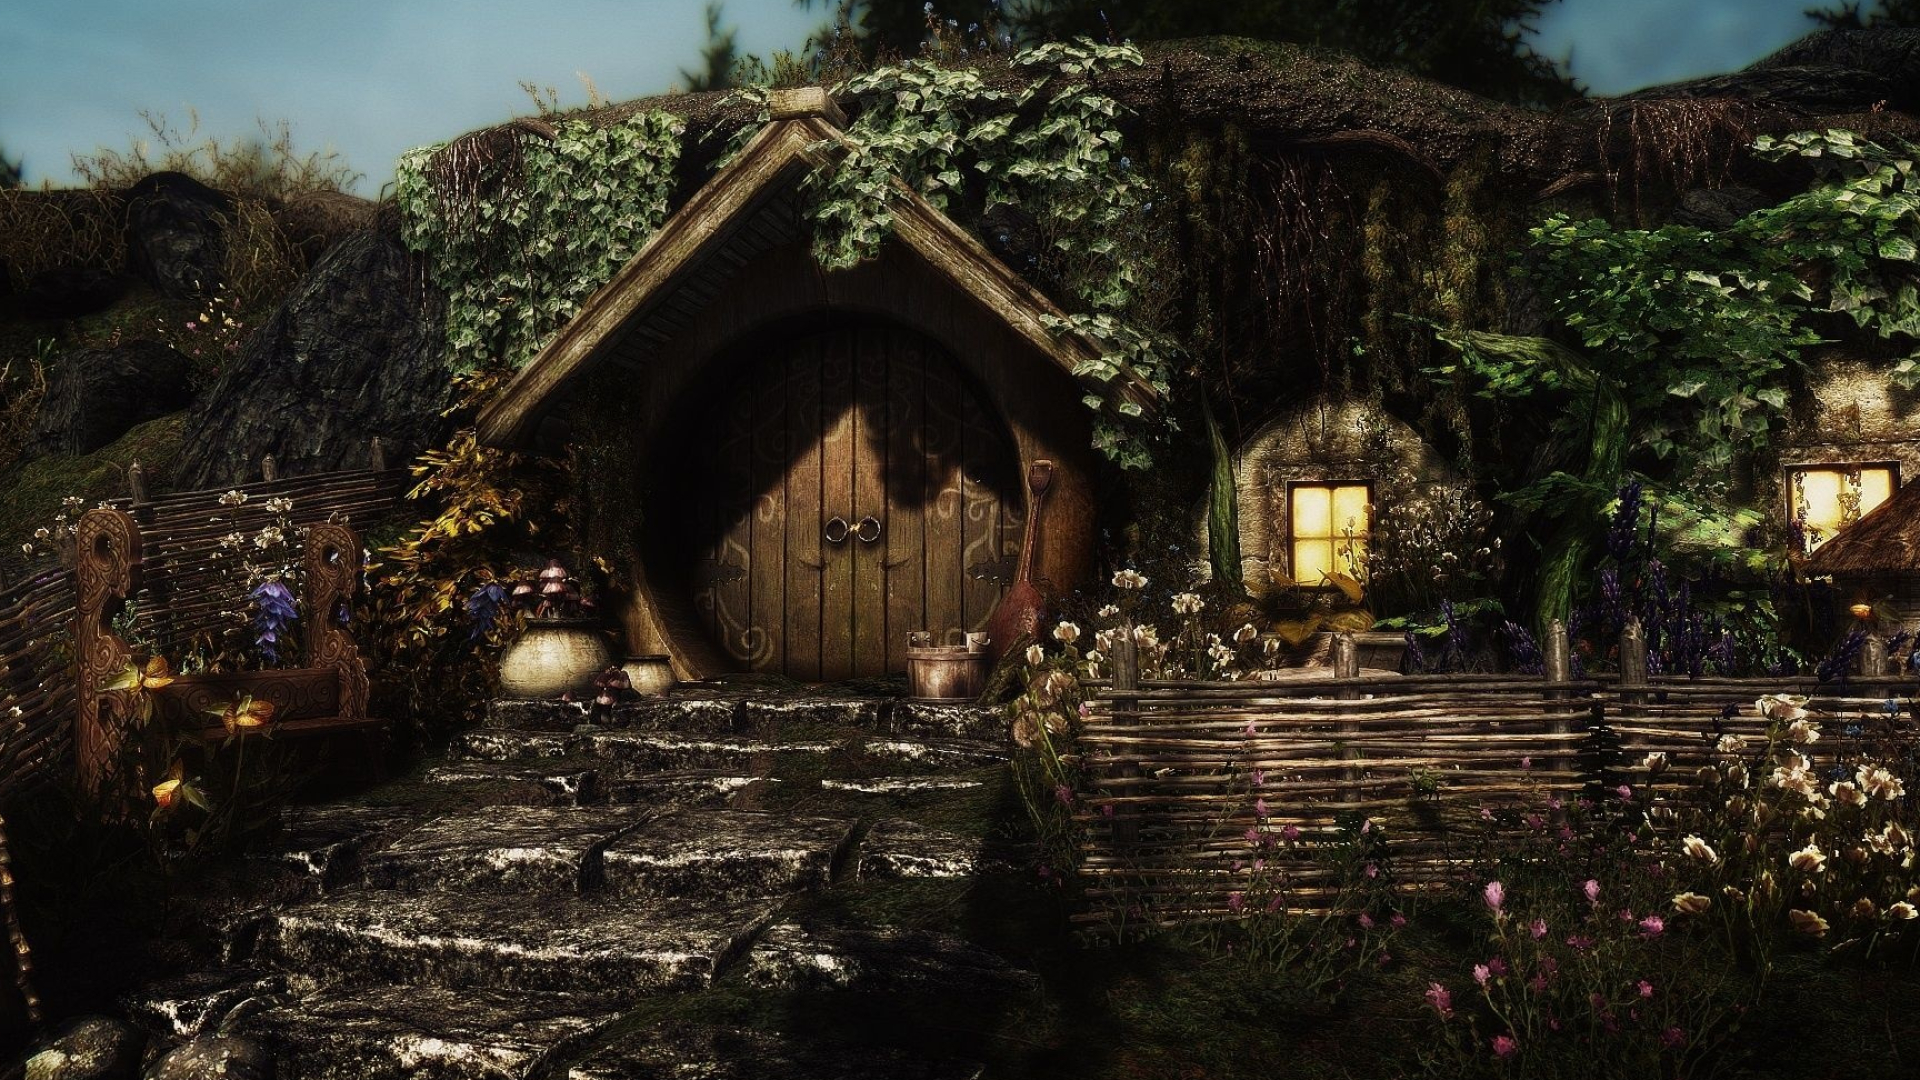 Hobbit hole wallpapers, Free backgrounds, Cozy houses, Magical settings, 1920x1080 Full HD Desktop